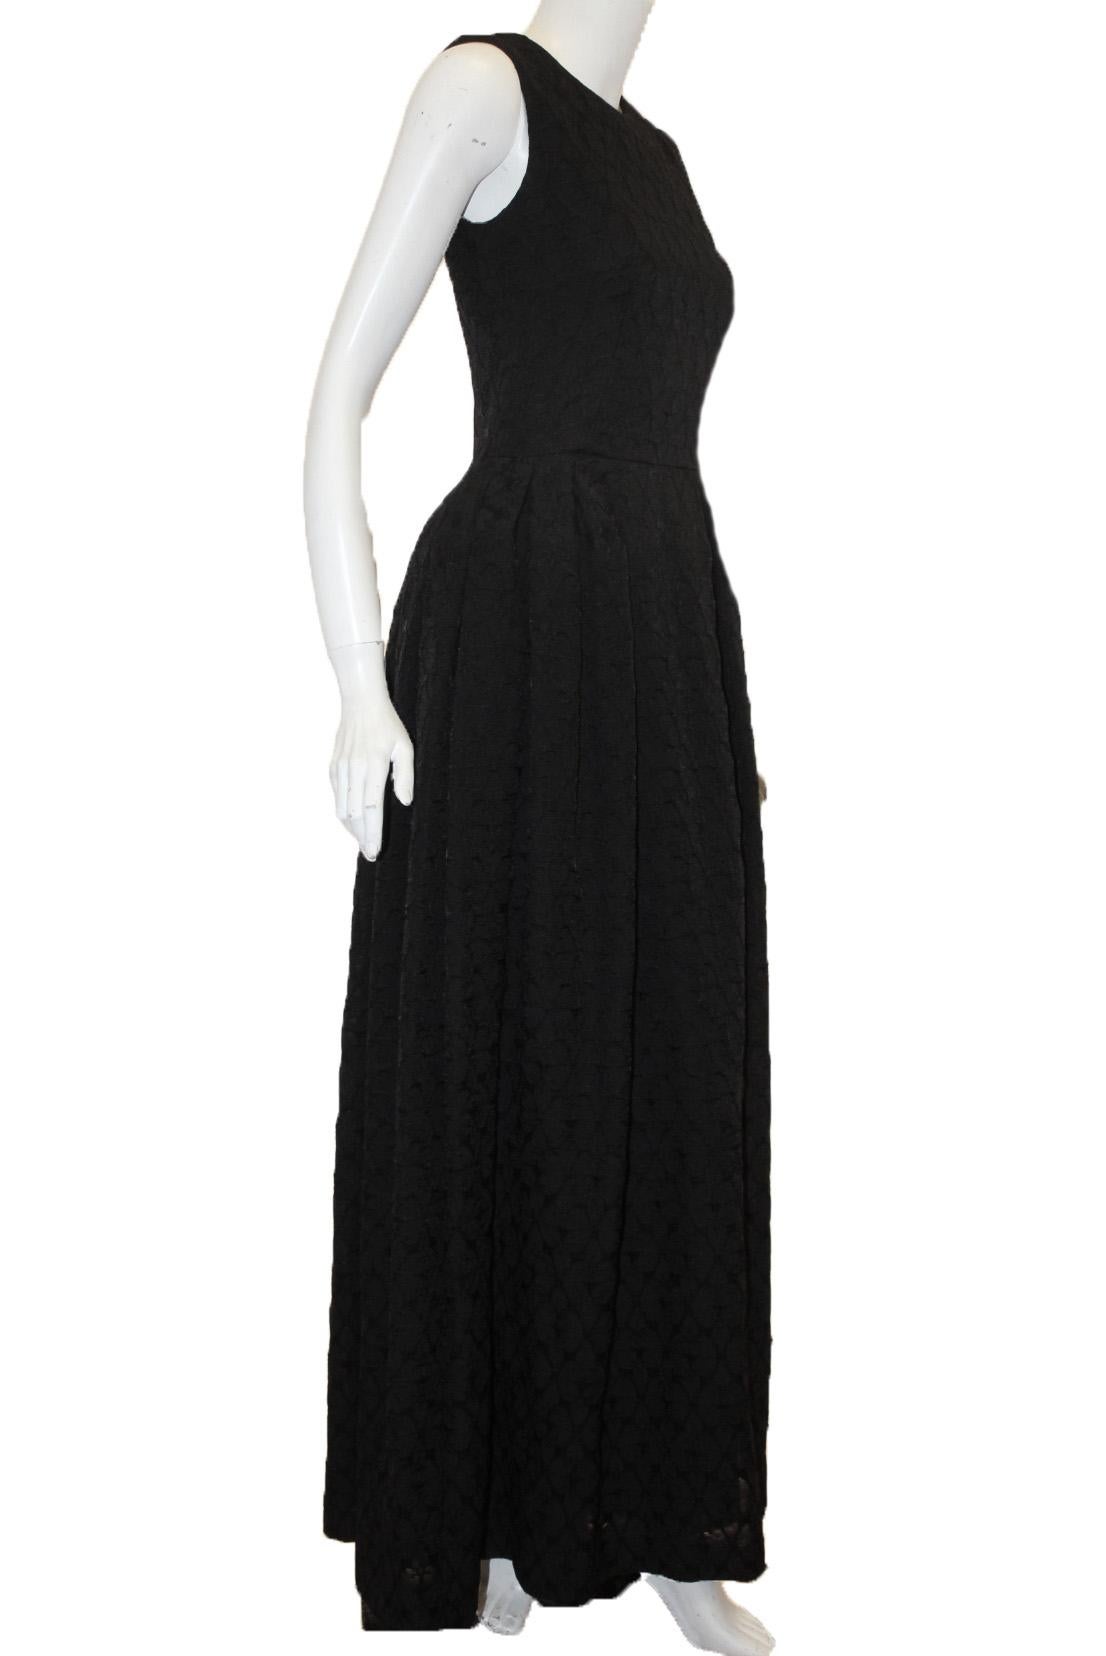 Alexander McQueen black on black round neckline gown is cinched at the waist and contains a full pleated skirt.  This gown is sleeveless and includes a back zipper for closure.  It is impeccably made in Italy.  Dress is fully lined with black silk